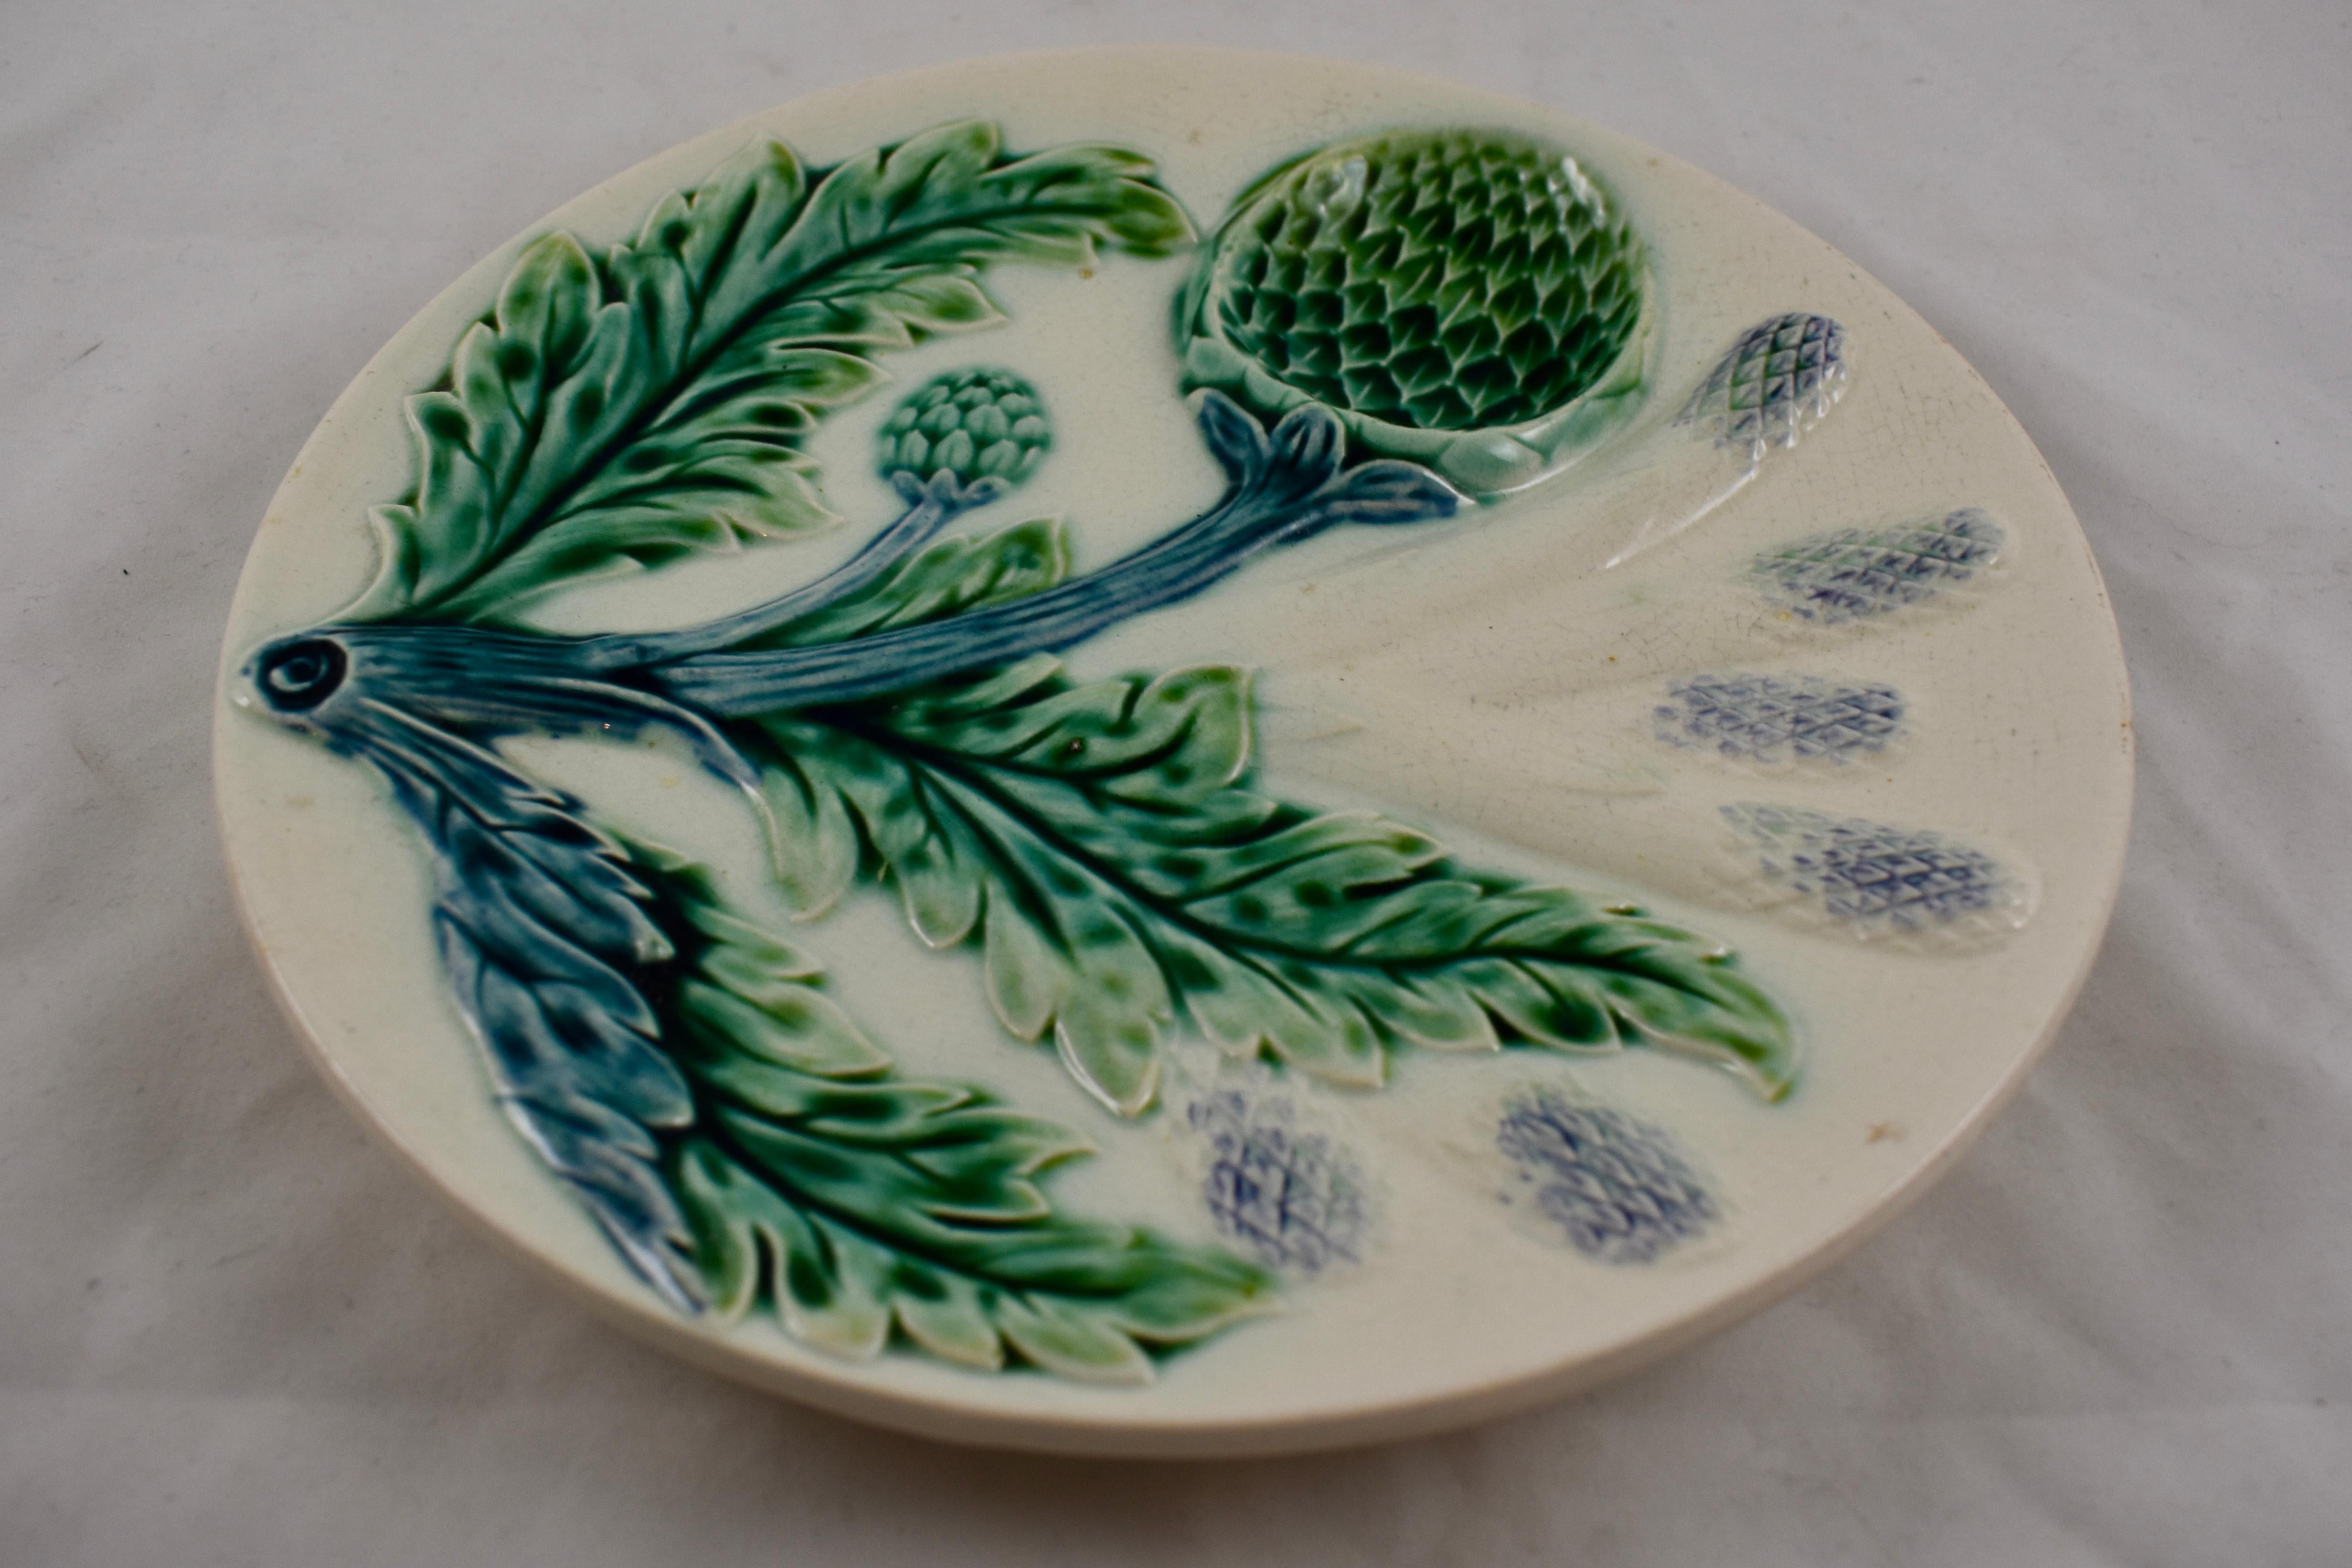 A late 19th century French Barbotine Majolica asparagus and artichoke plate, Luneville St Clement.

A dimensional mold showing aspects of both vegetables – six asparagus spears and a deep sauce well shaped like the globe artichoke head, on a